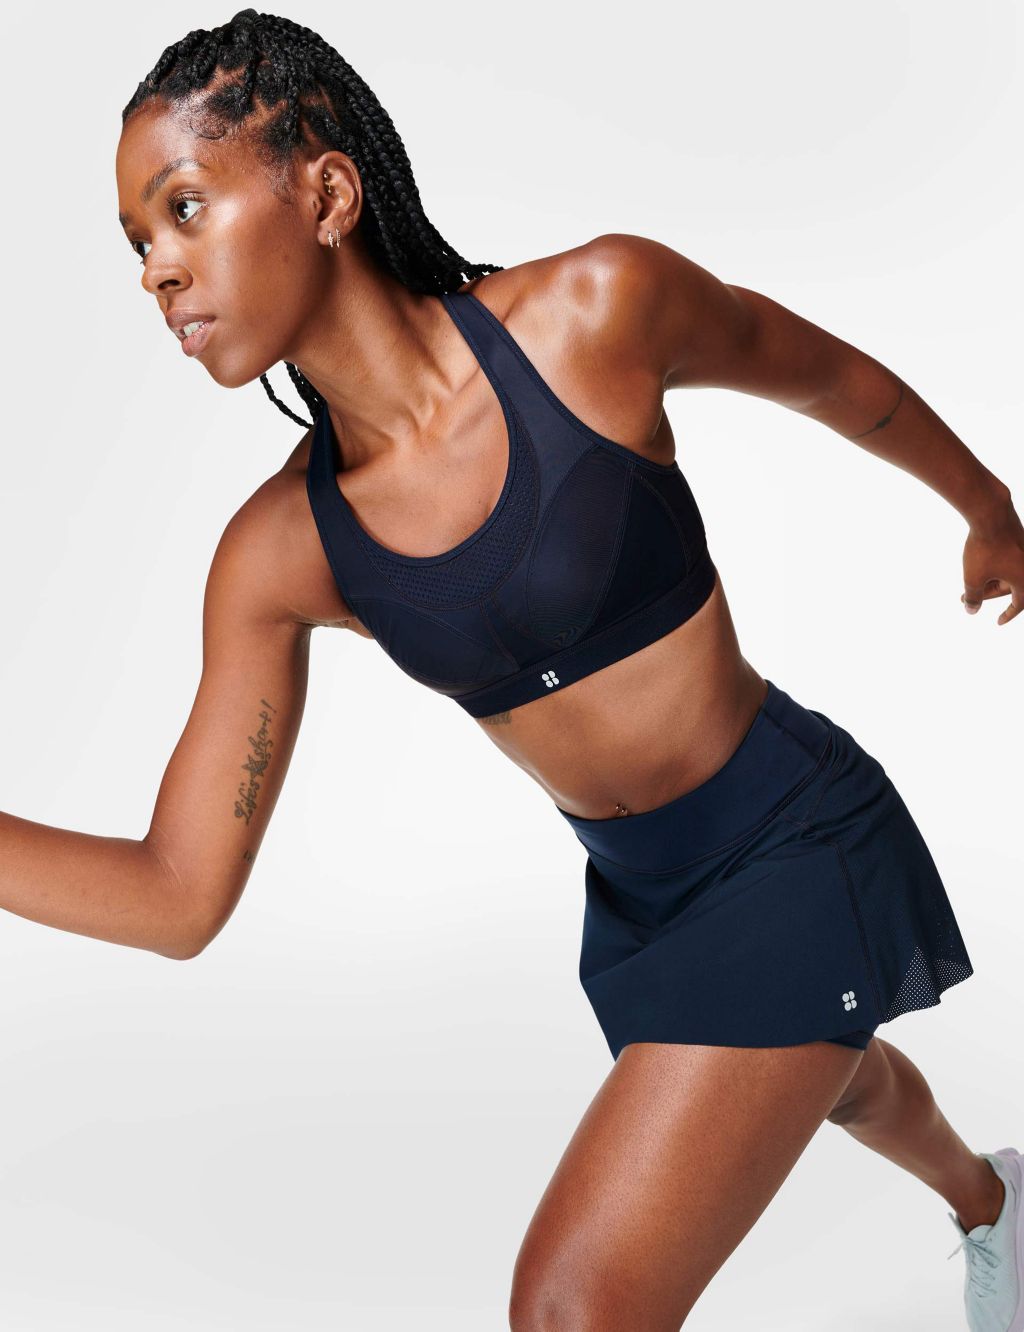 UK's M&S boosts sportswear lineup with Adidas and Sweaty Betty